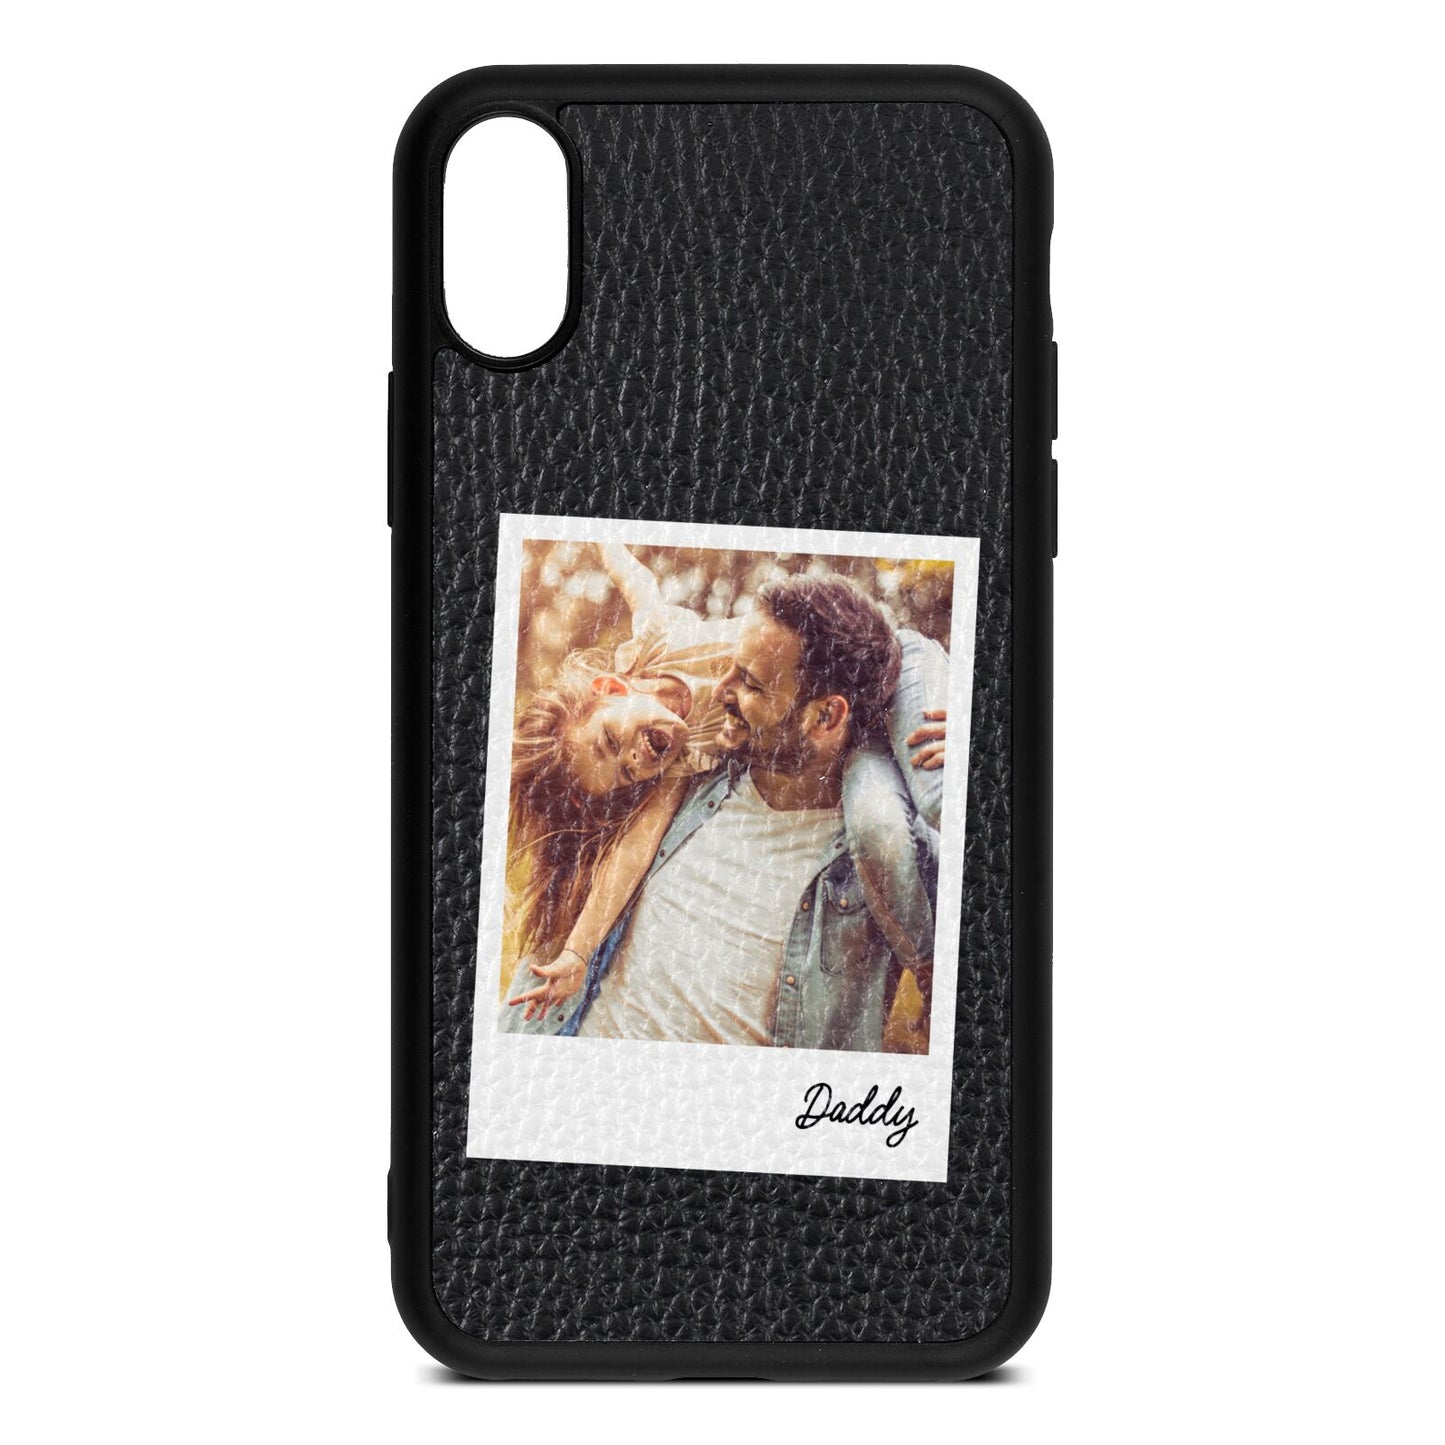 Fathers Day Photo Black Pebble Leather iPhone Xs Case